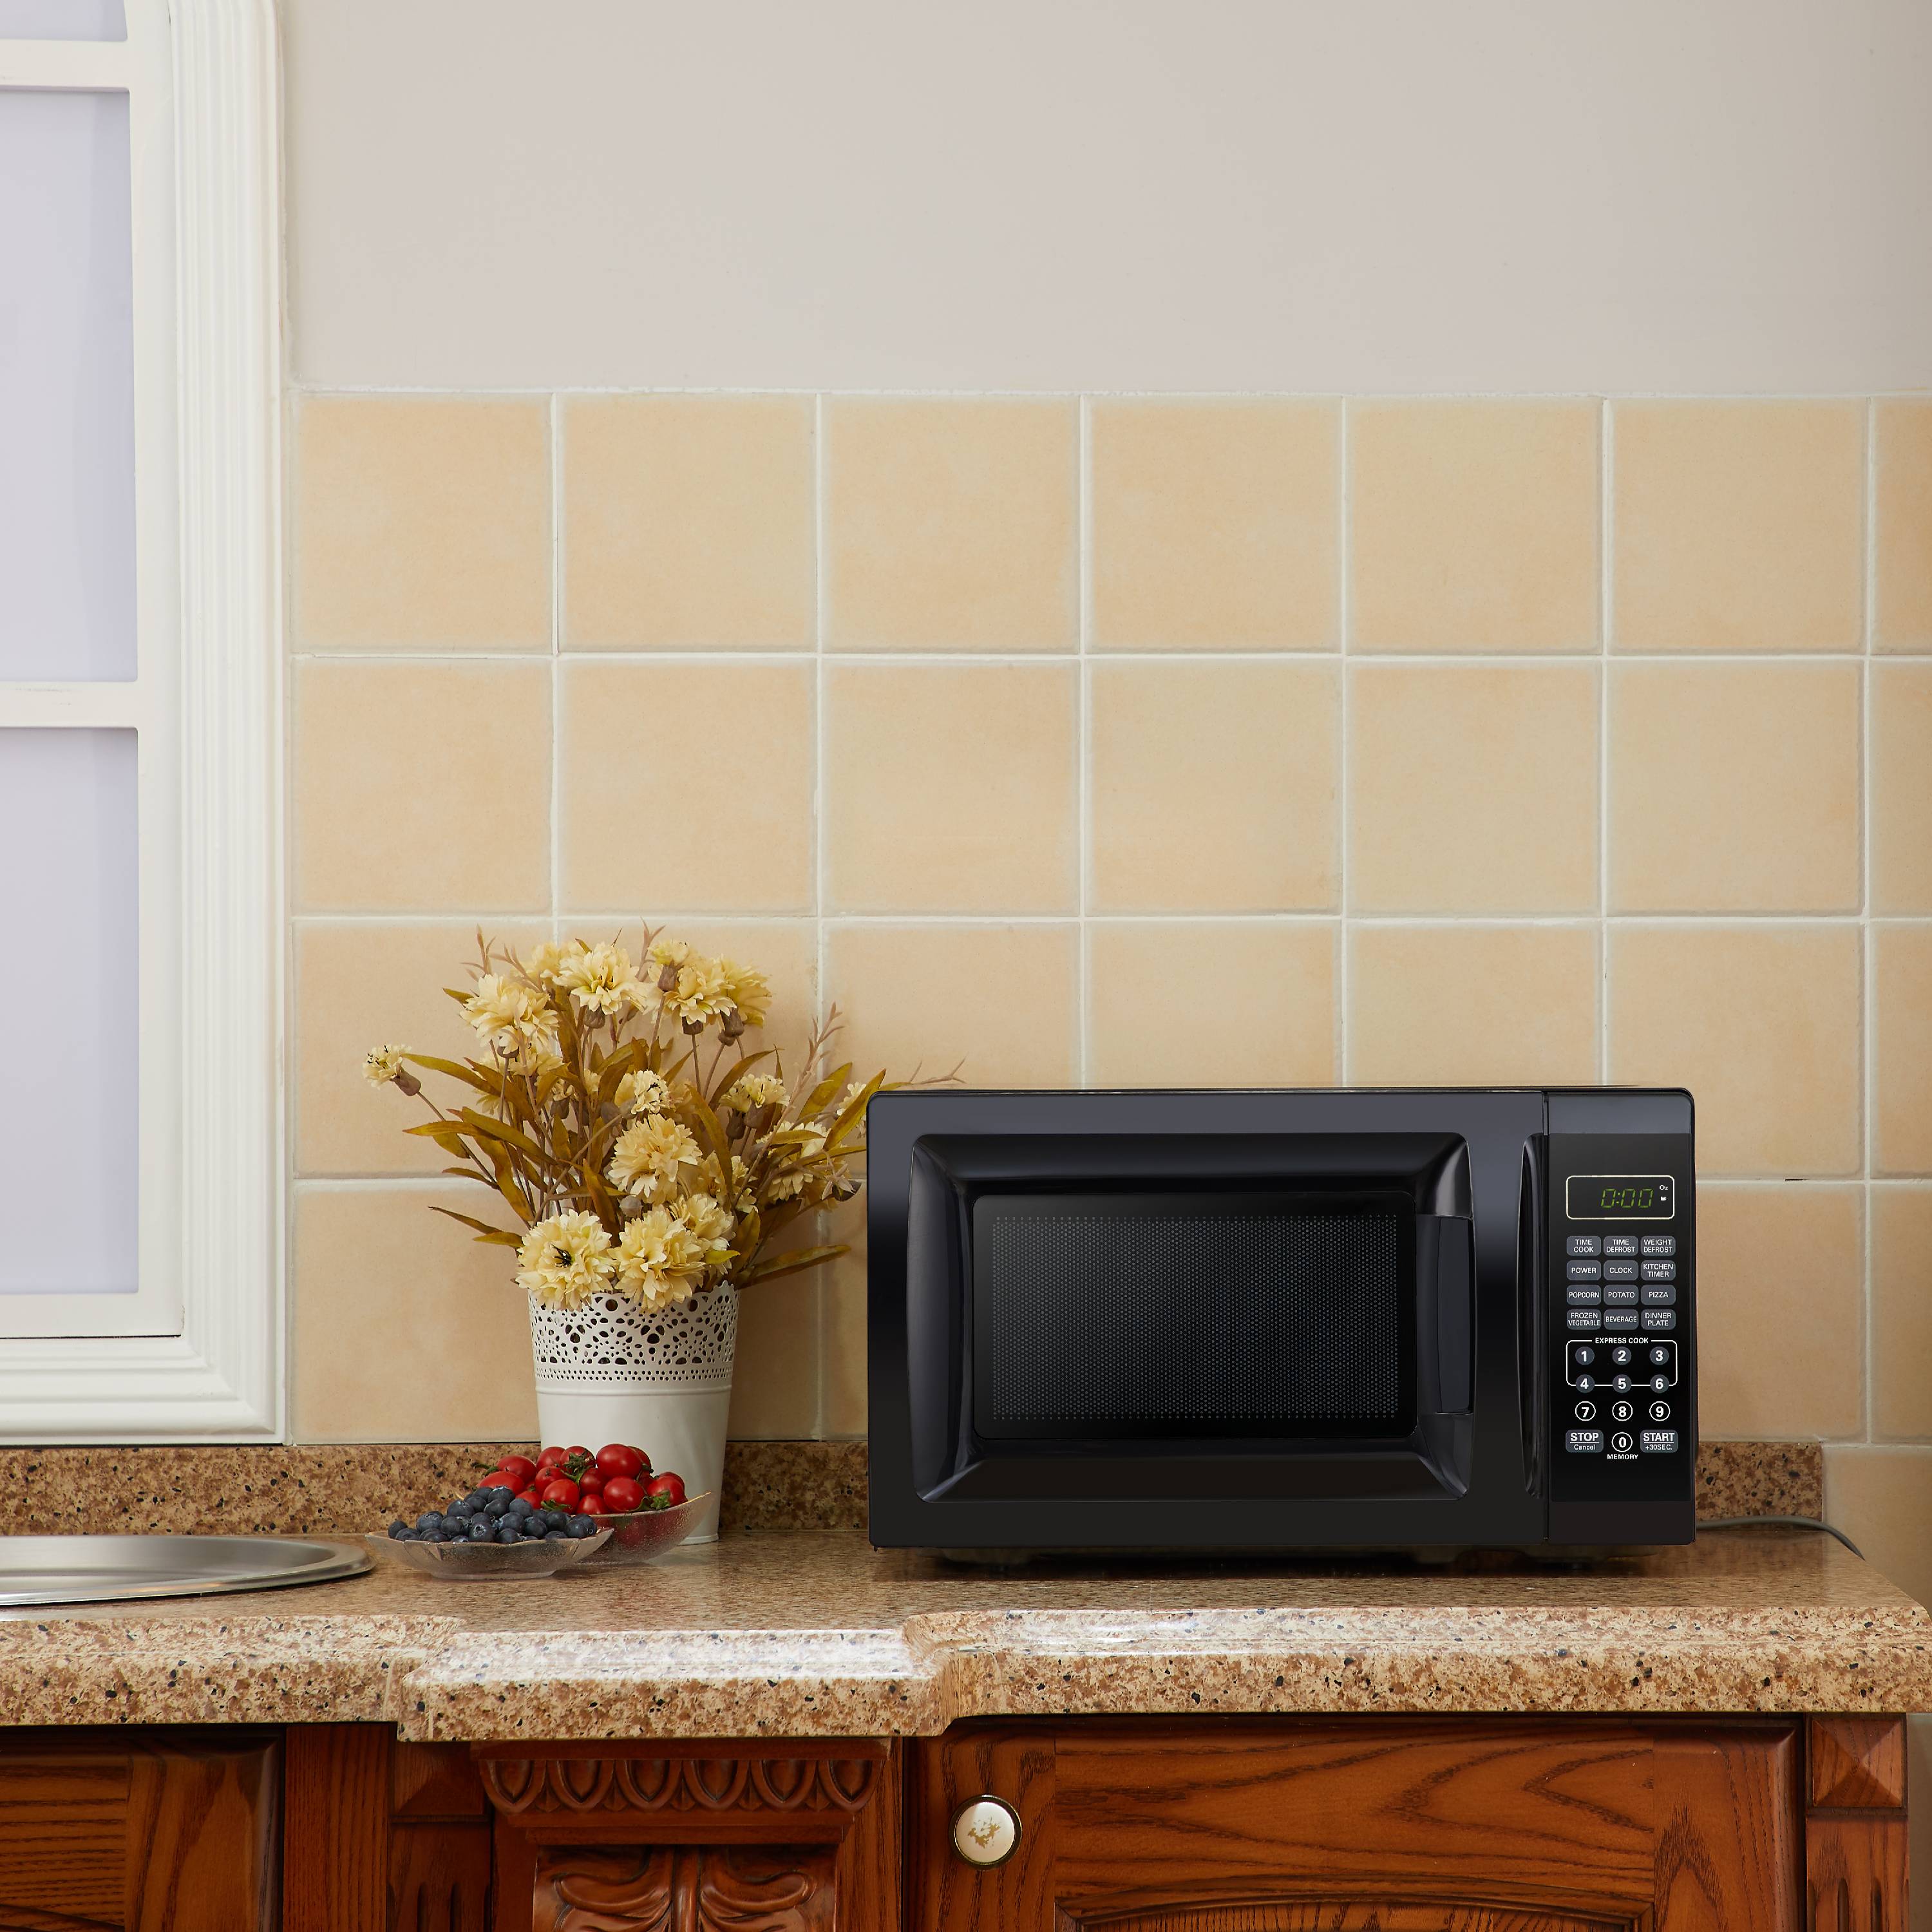 Mainstays 0.7 Cu. Ft. 700W Black Microwave Oven - image 3 of 7